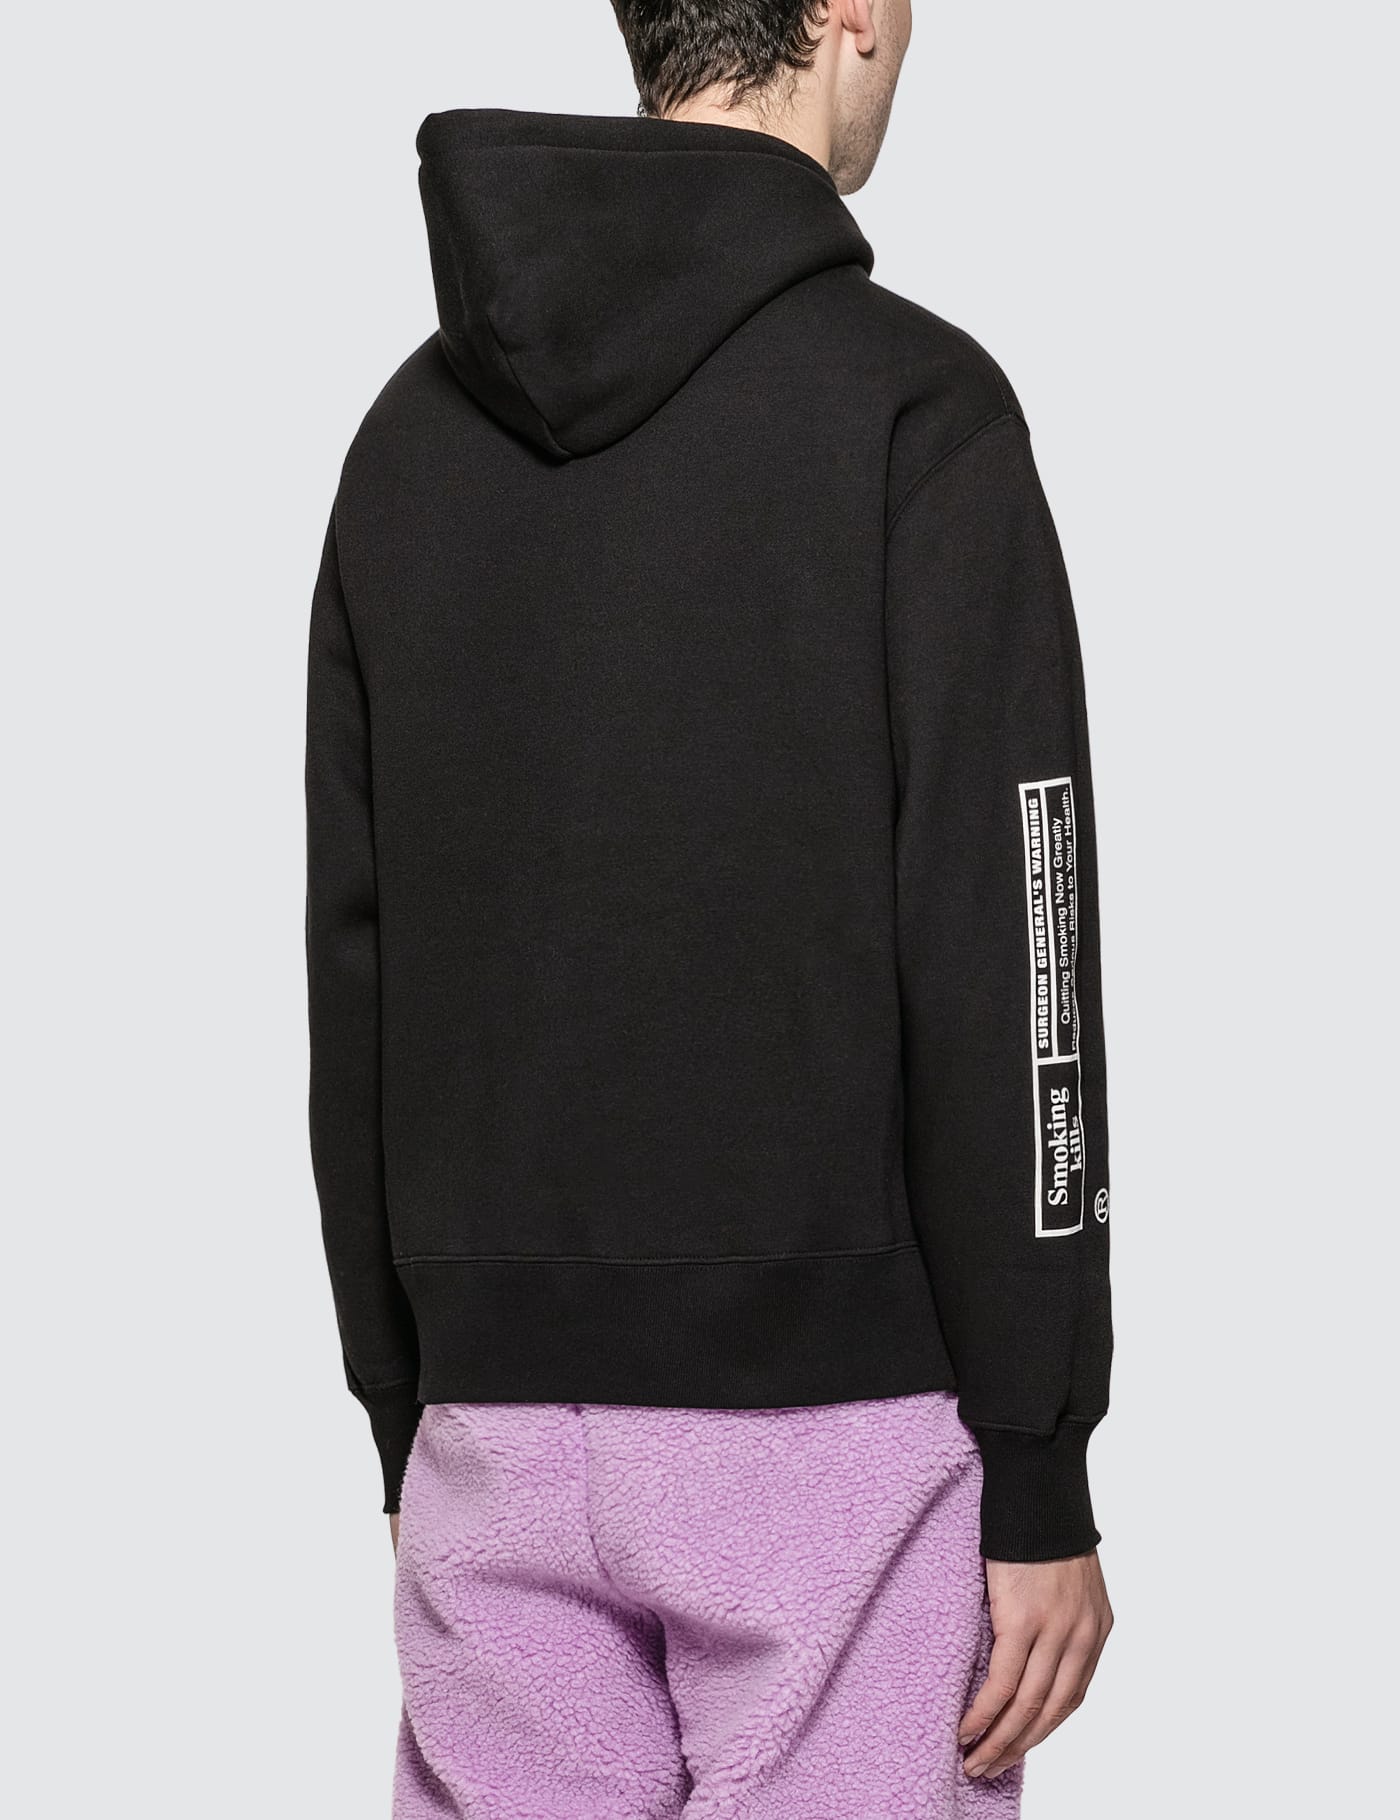 FR2 - Romantic Date Hoodie | HBX - Globally Curated Fashion and